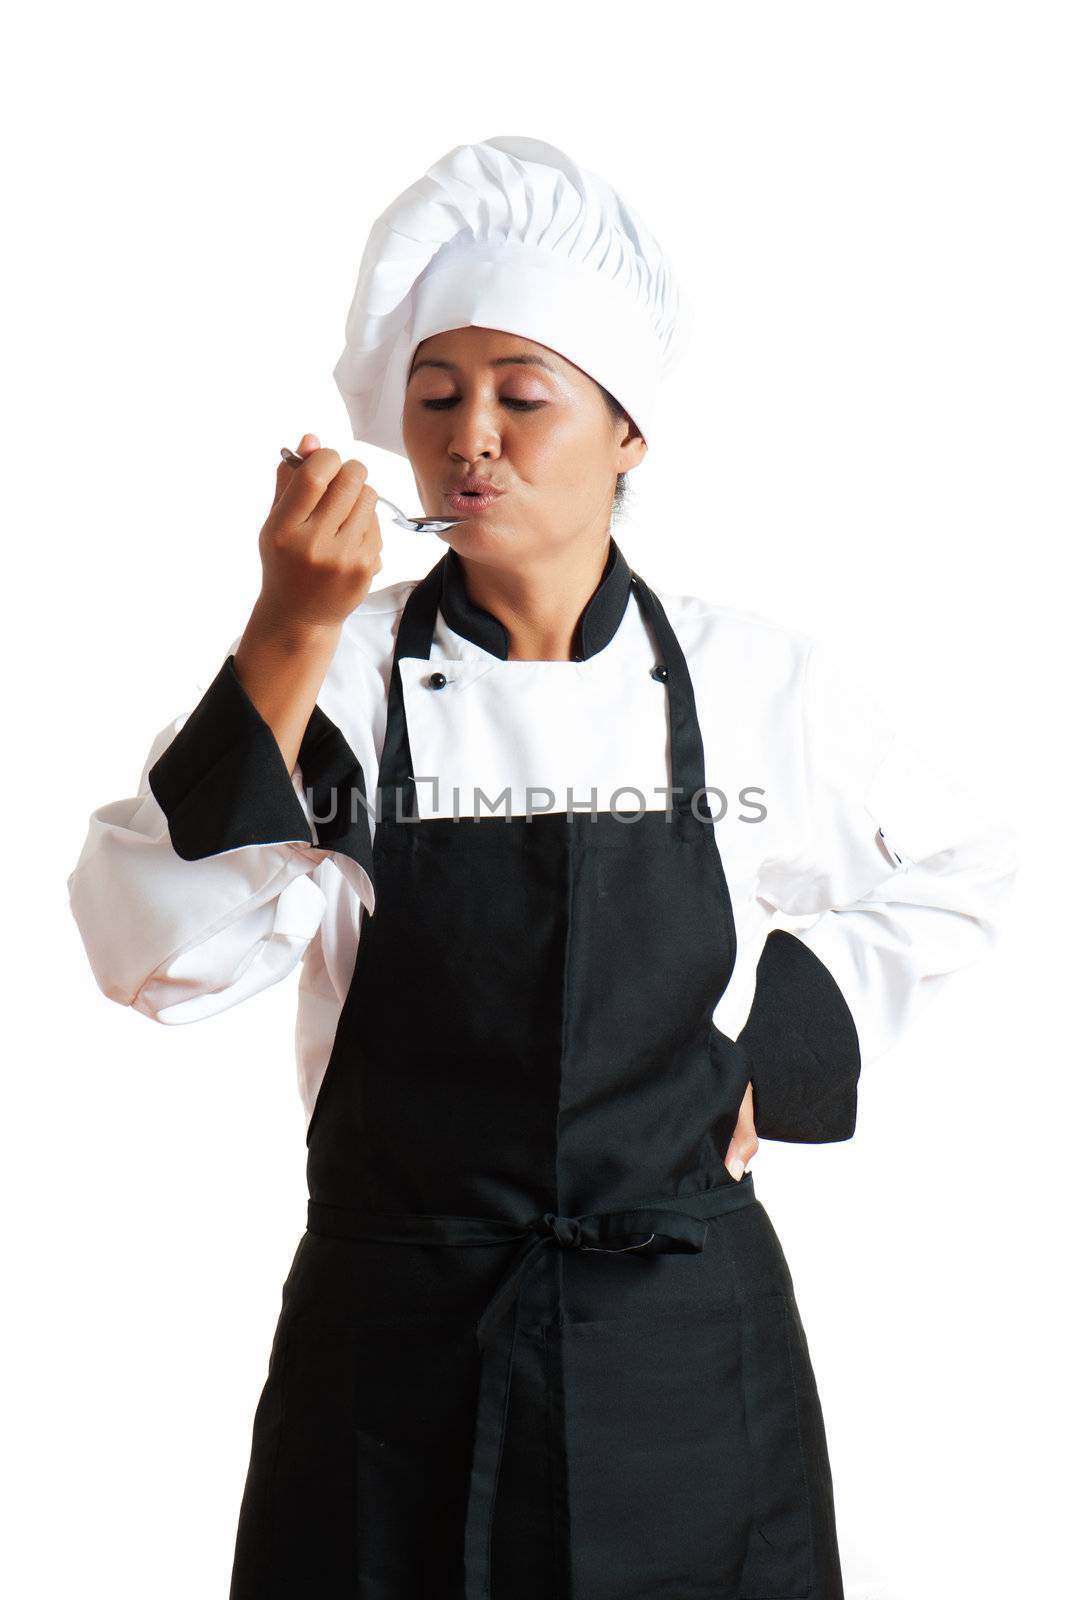 A asian woman as restaurant chef tasting something with a spoon in the hand on white background